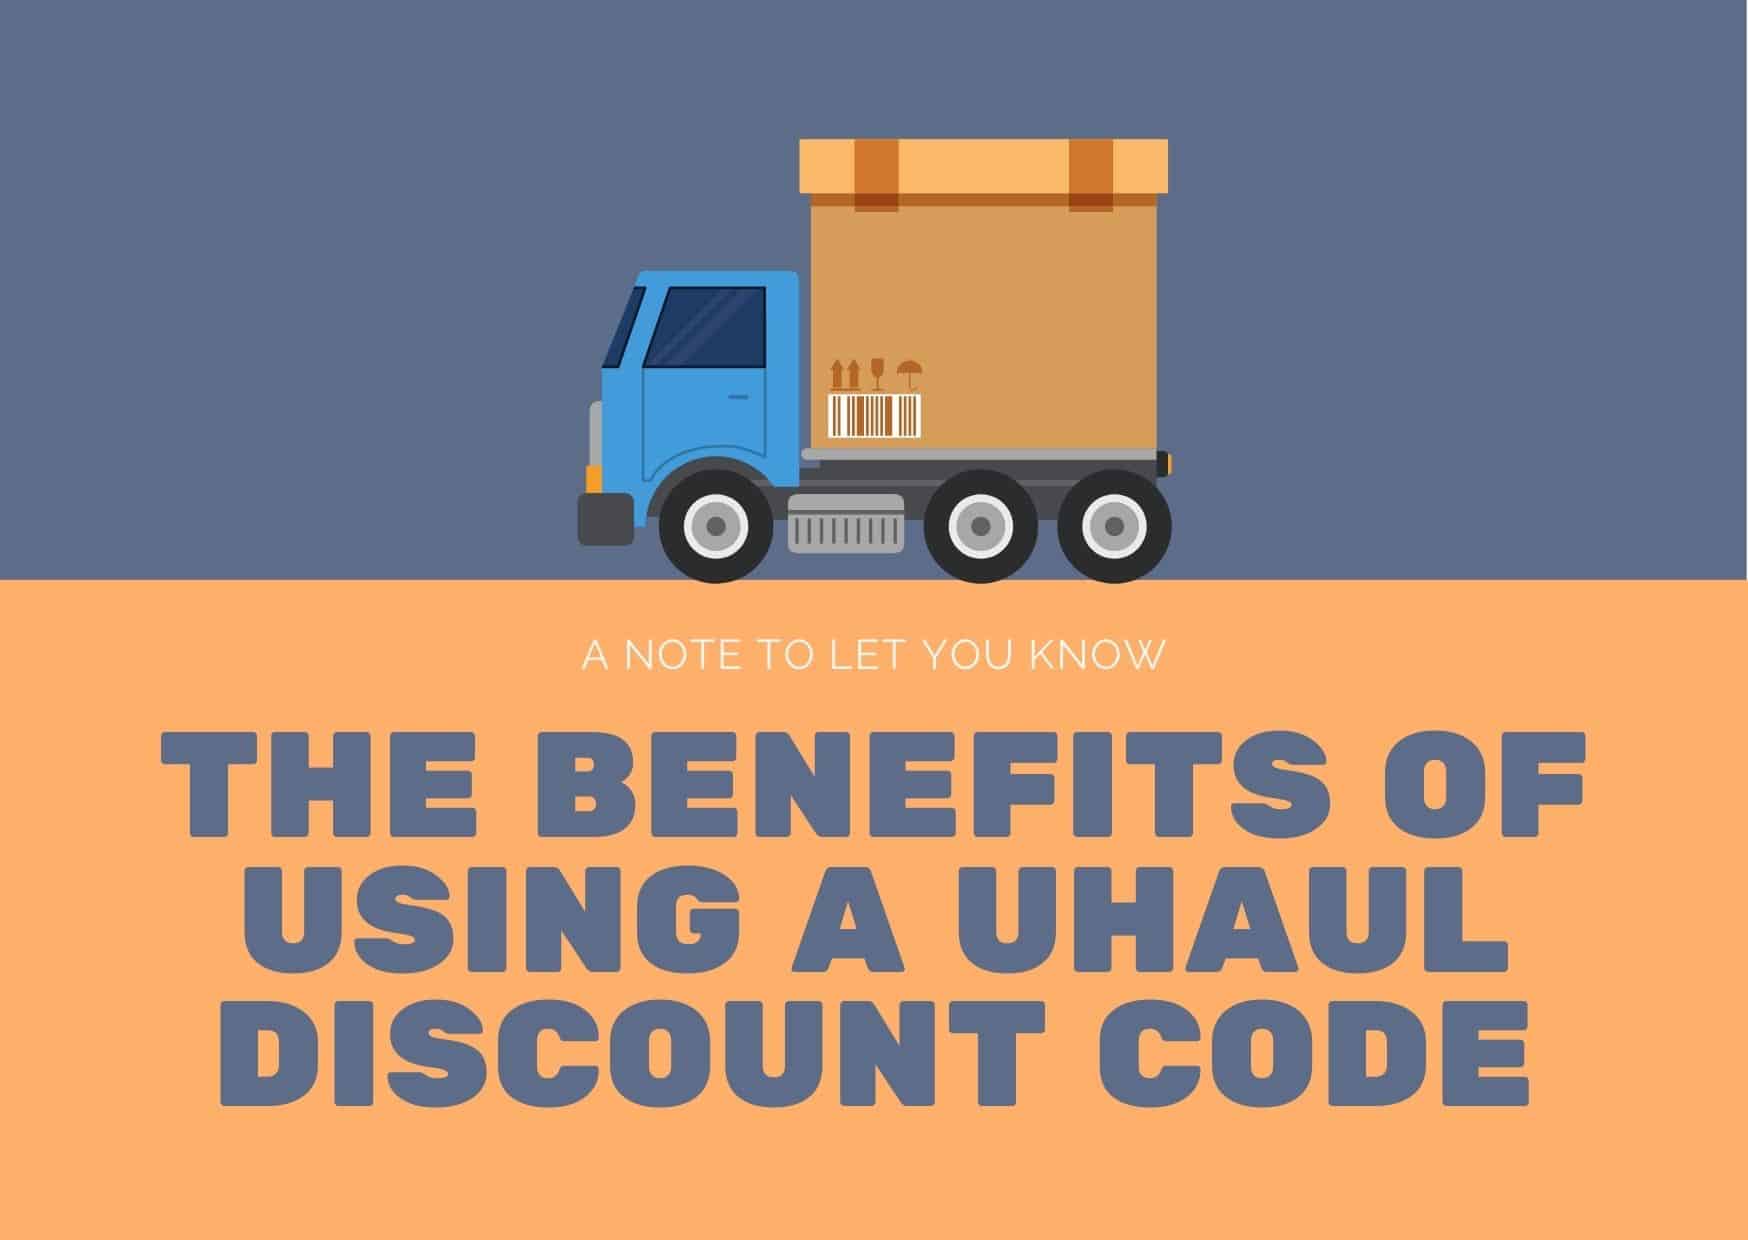 The benefits of using a Uhaul discount code